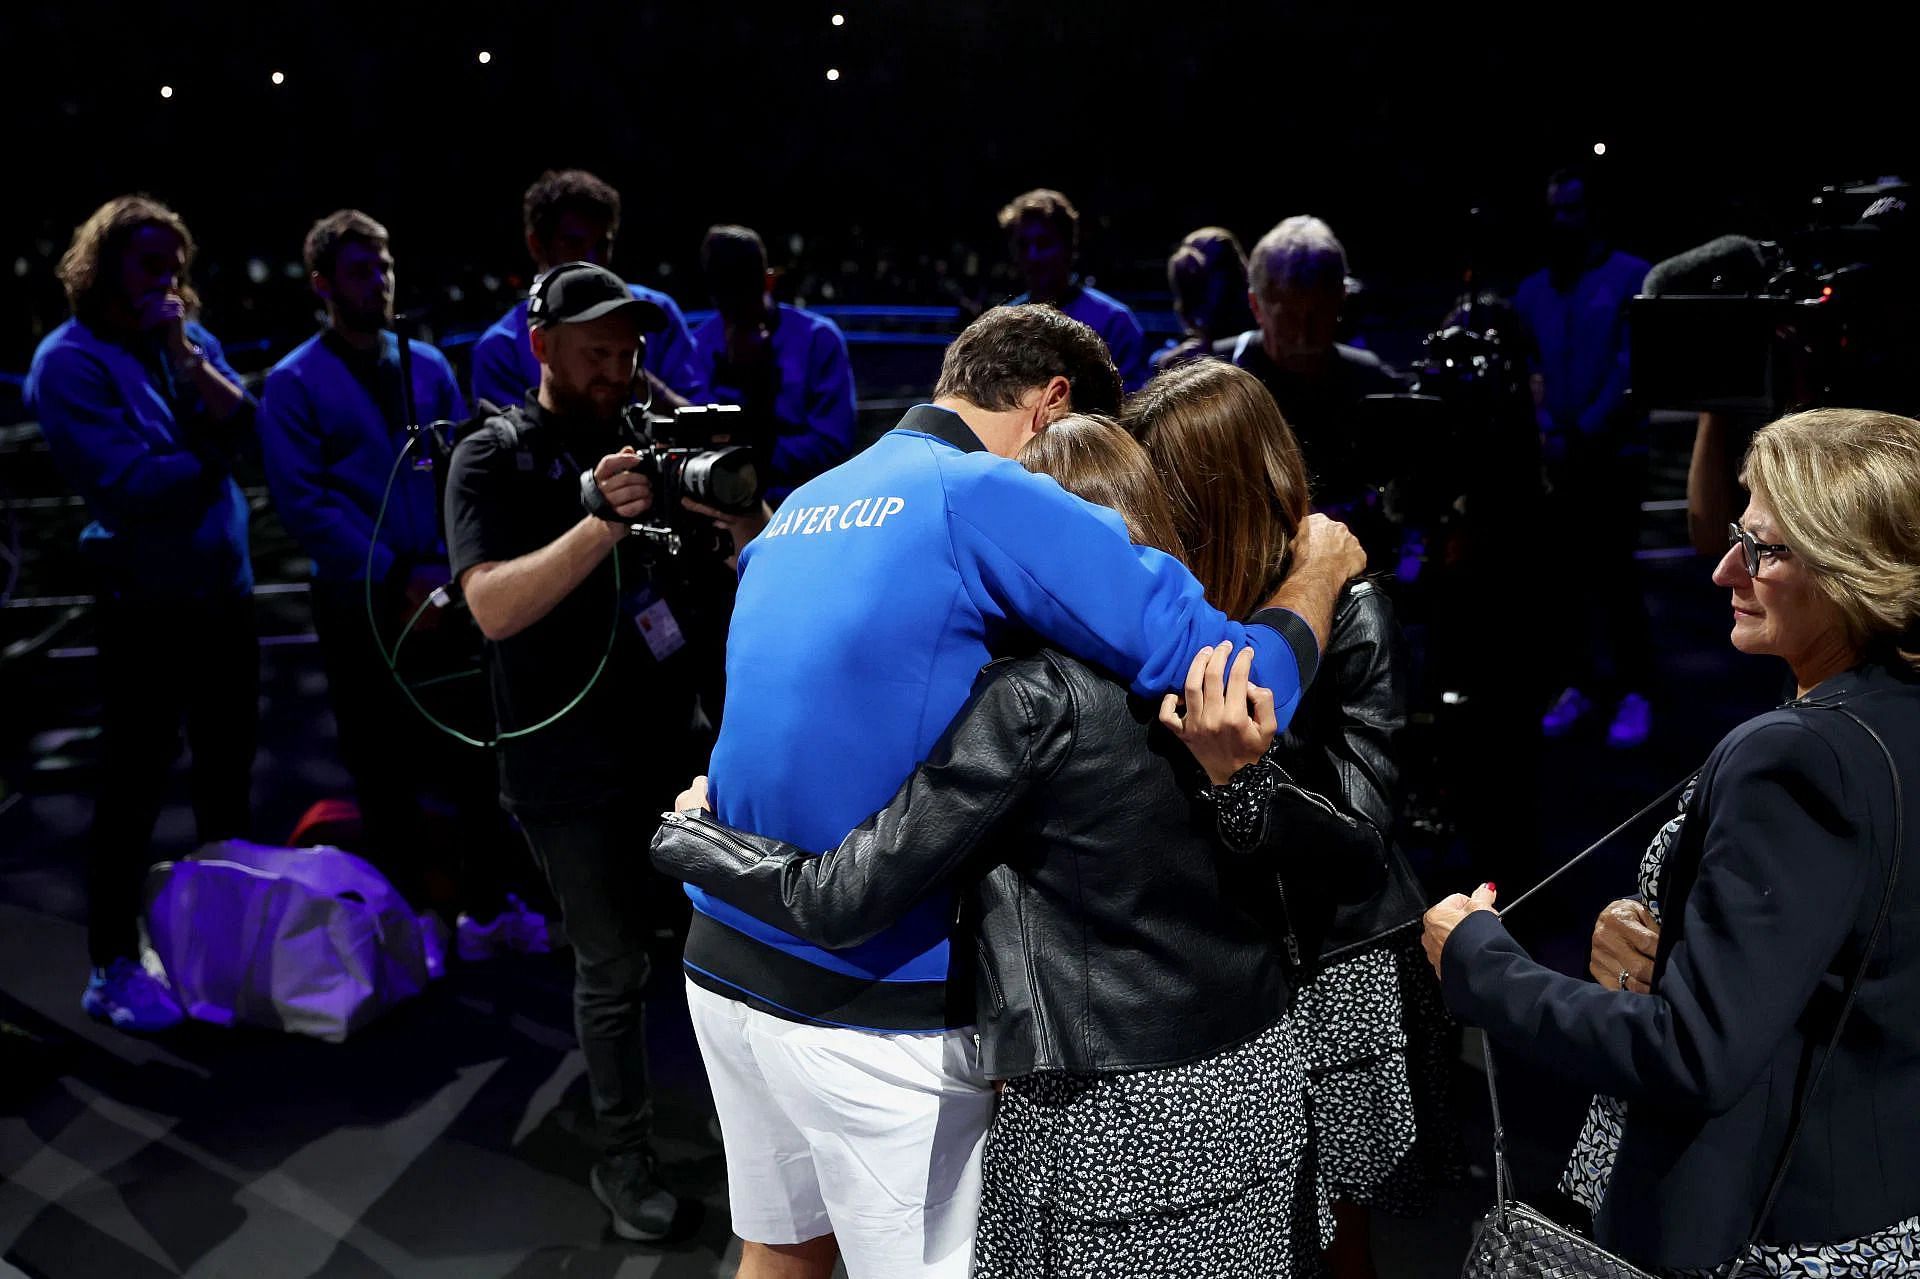 Federer hugging his wife and daughters after his final match